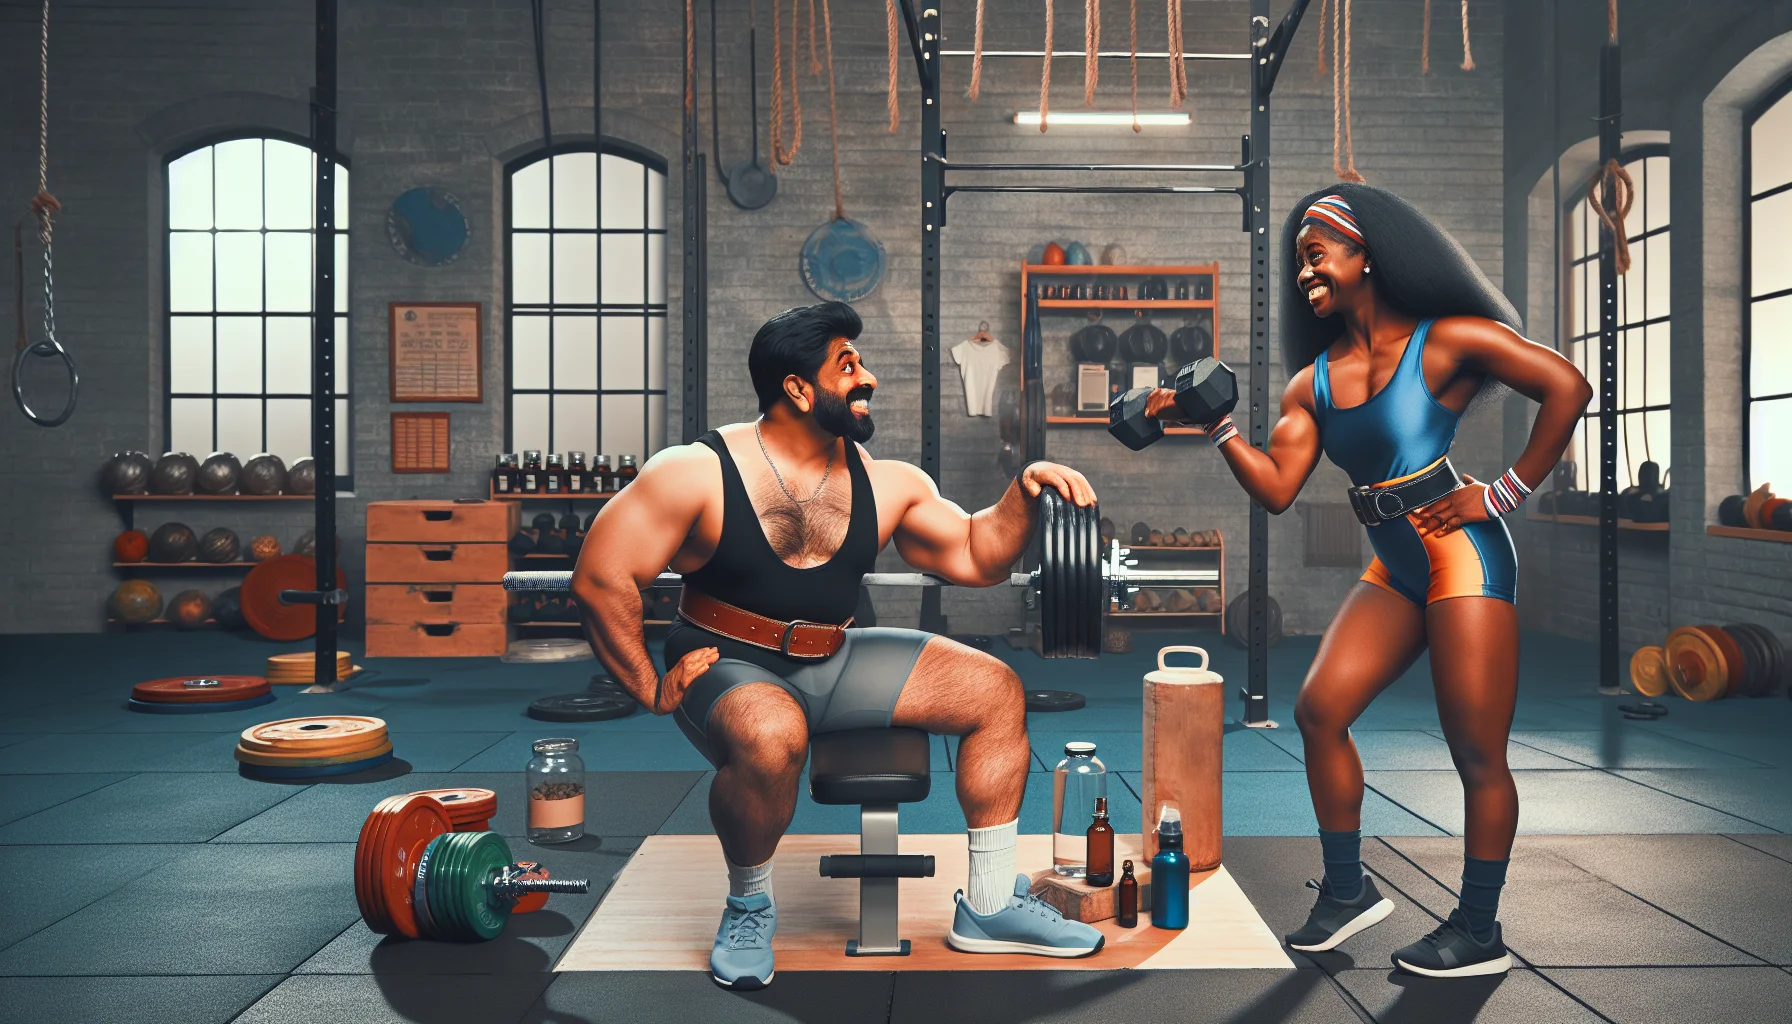 Depict a comedic tableau of a South Asian strongman and a Black female powerlifter engaged in a friendly competition in a local gym environment. The strongman is amusingly struggling to lift a dumbbell, while the powerlifter confidently hoists a heavy barbell above her head. There are gym equipment and health supplements in the background hinting at the scene's context. Include details such as their professional workout attire, perspiration evidencing their physical exertion, and friendly grins that encourage viewers to engage in regular exercise.